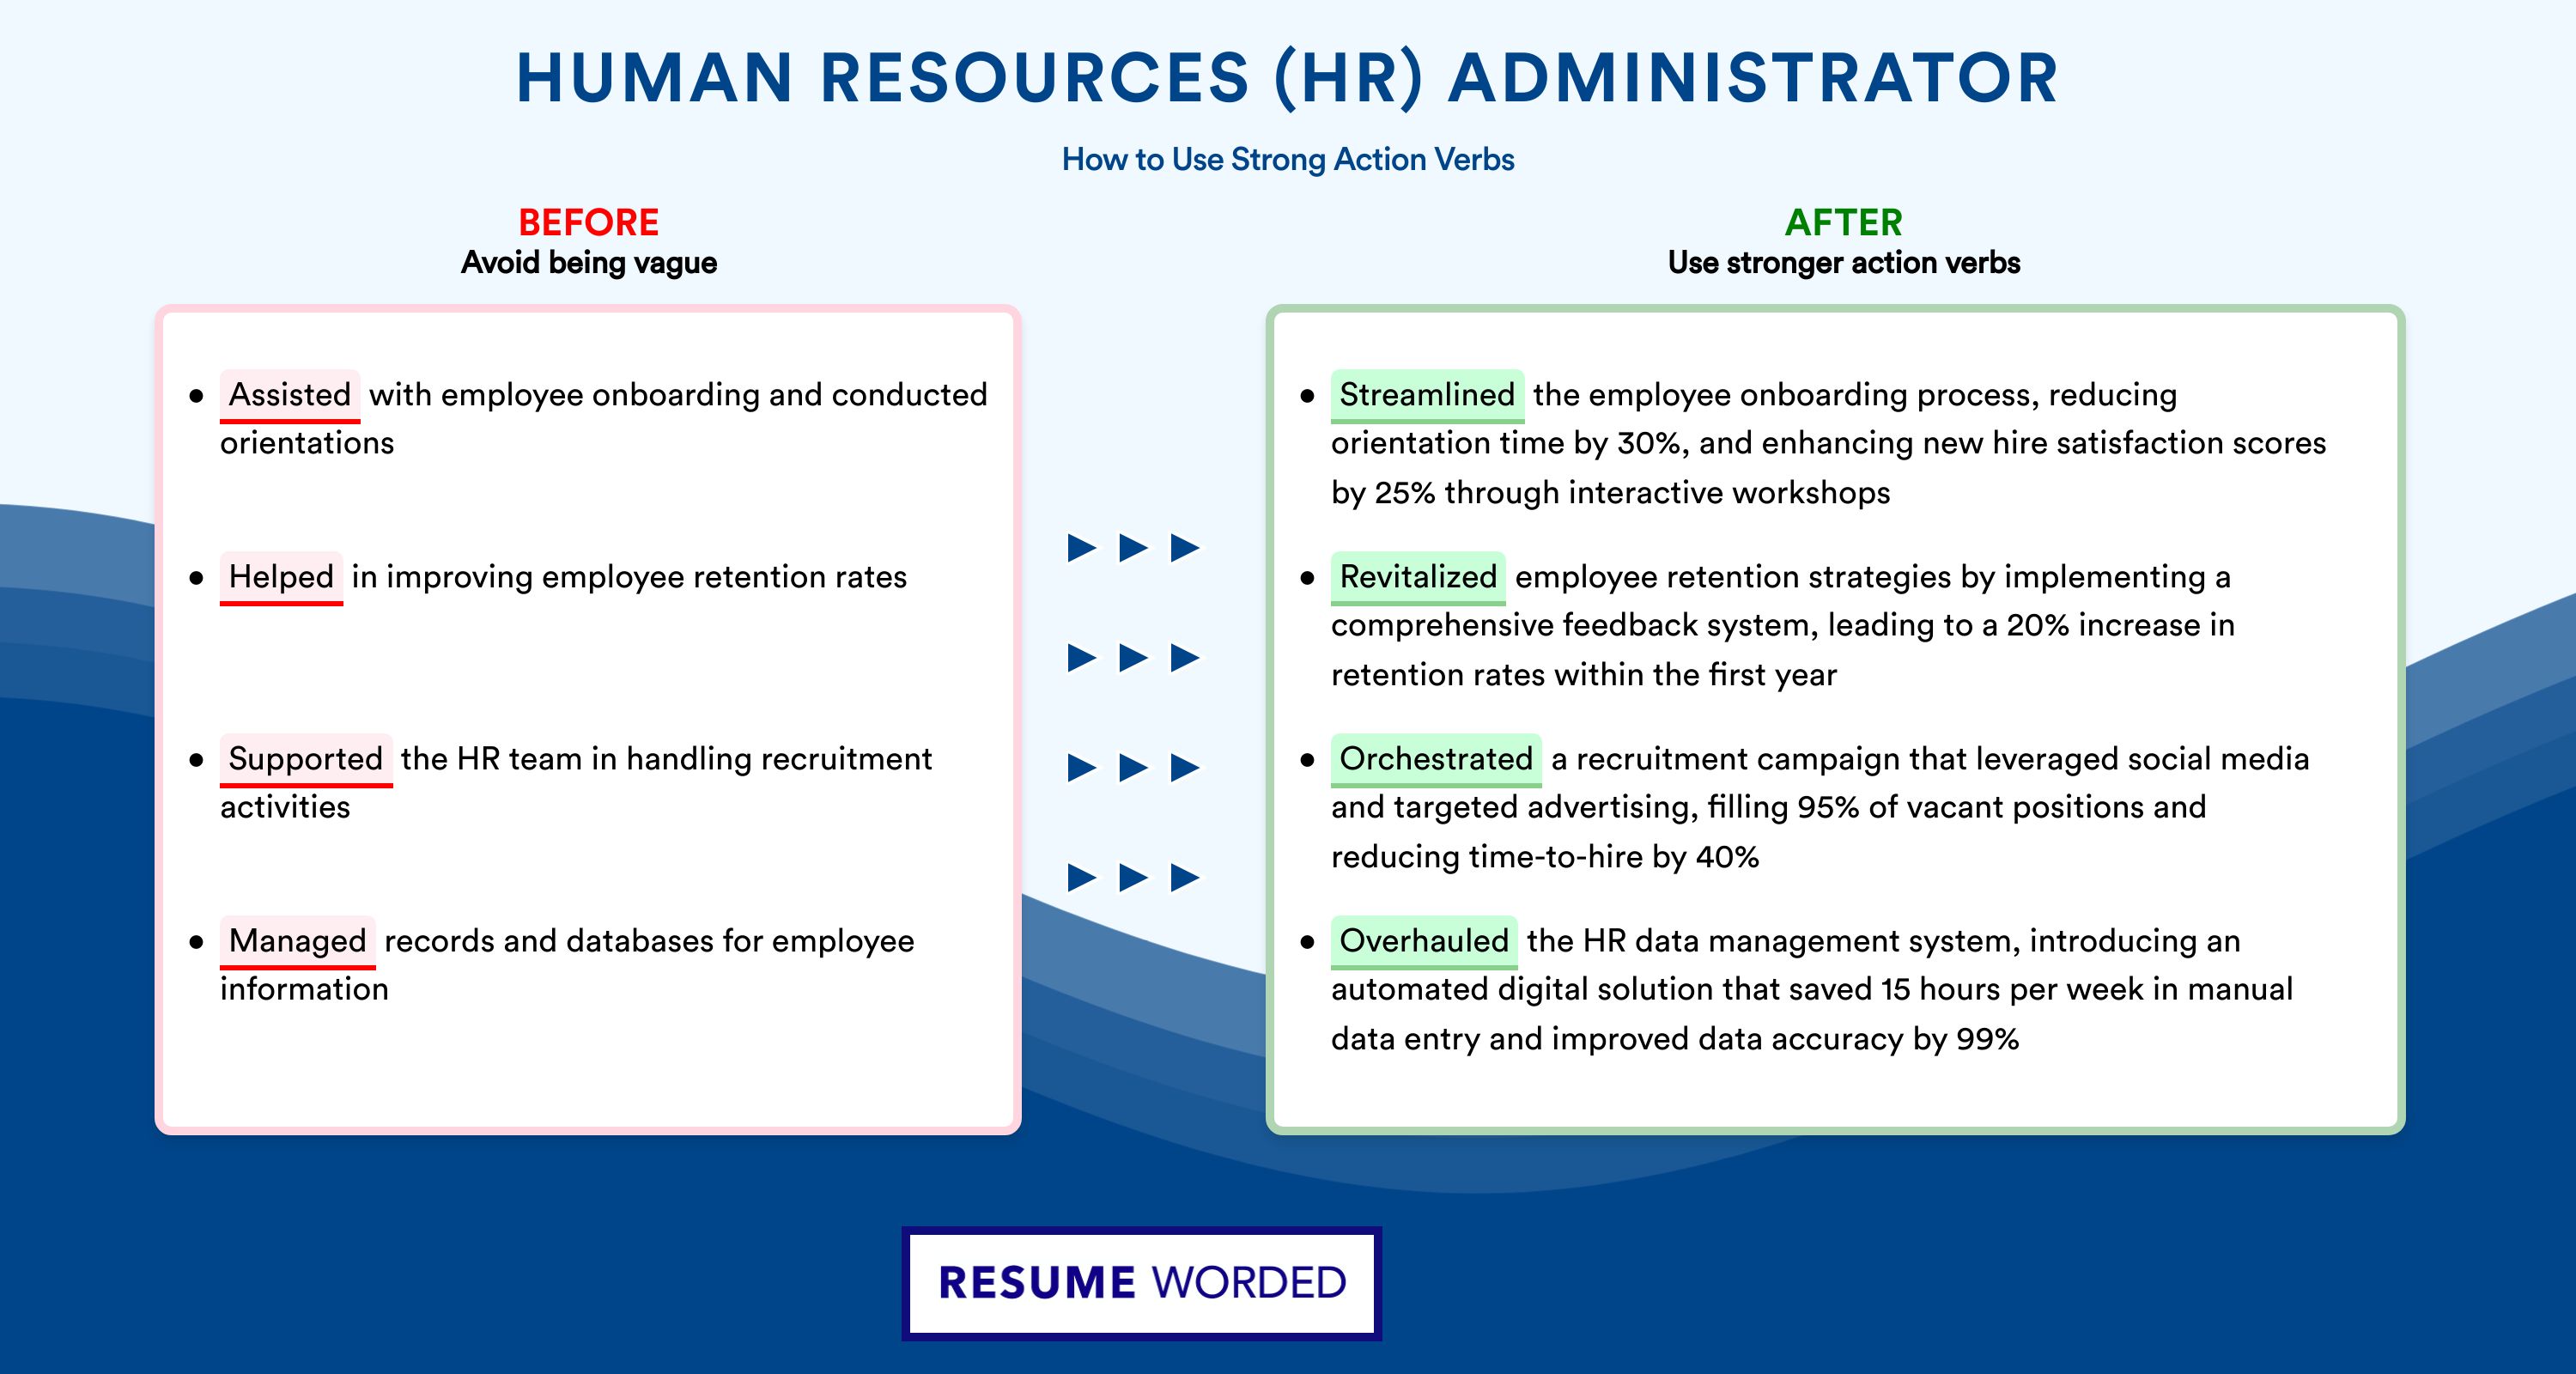 Action Verbs for Human Resources (HR) Administrator